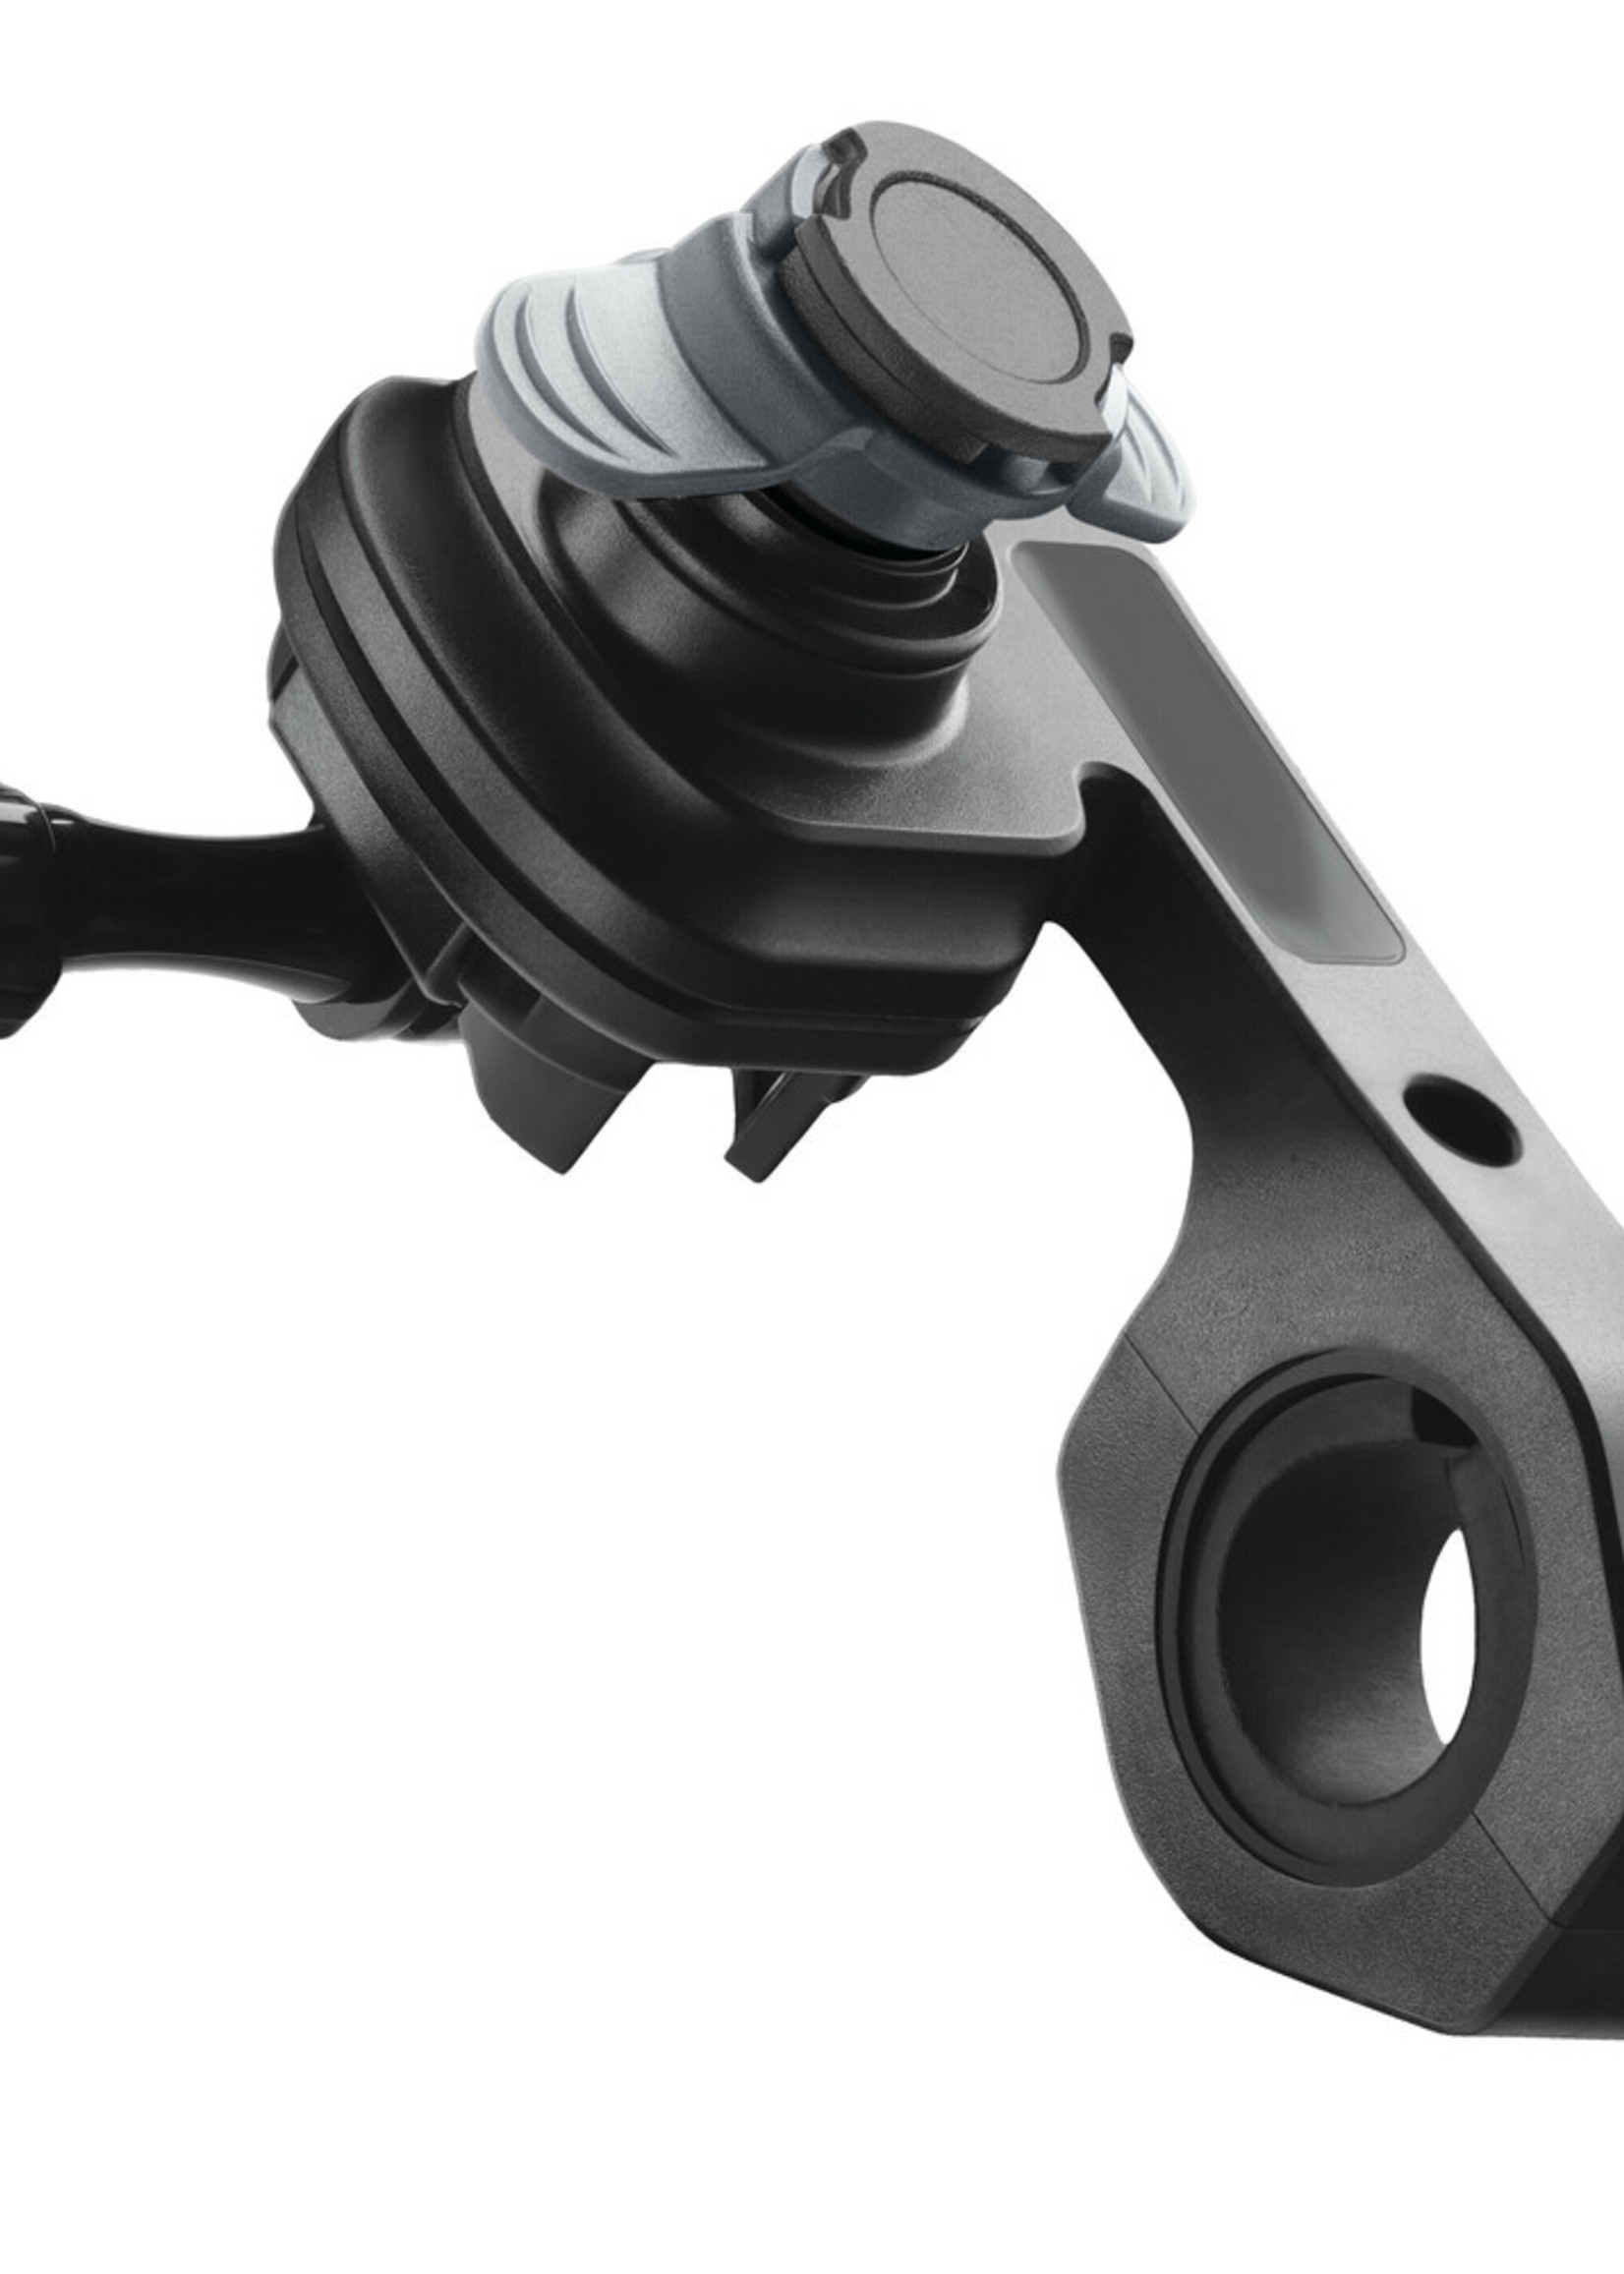 Optiline Opti-Combo, handlebar mount with action cam support